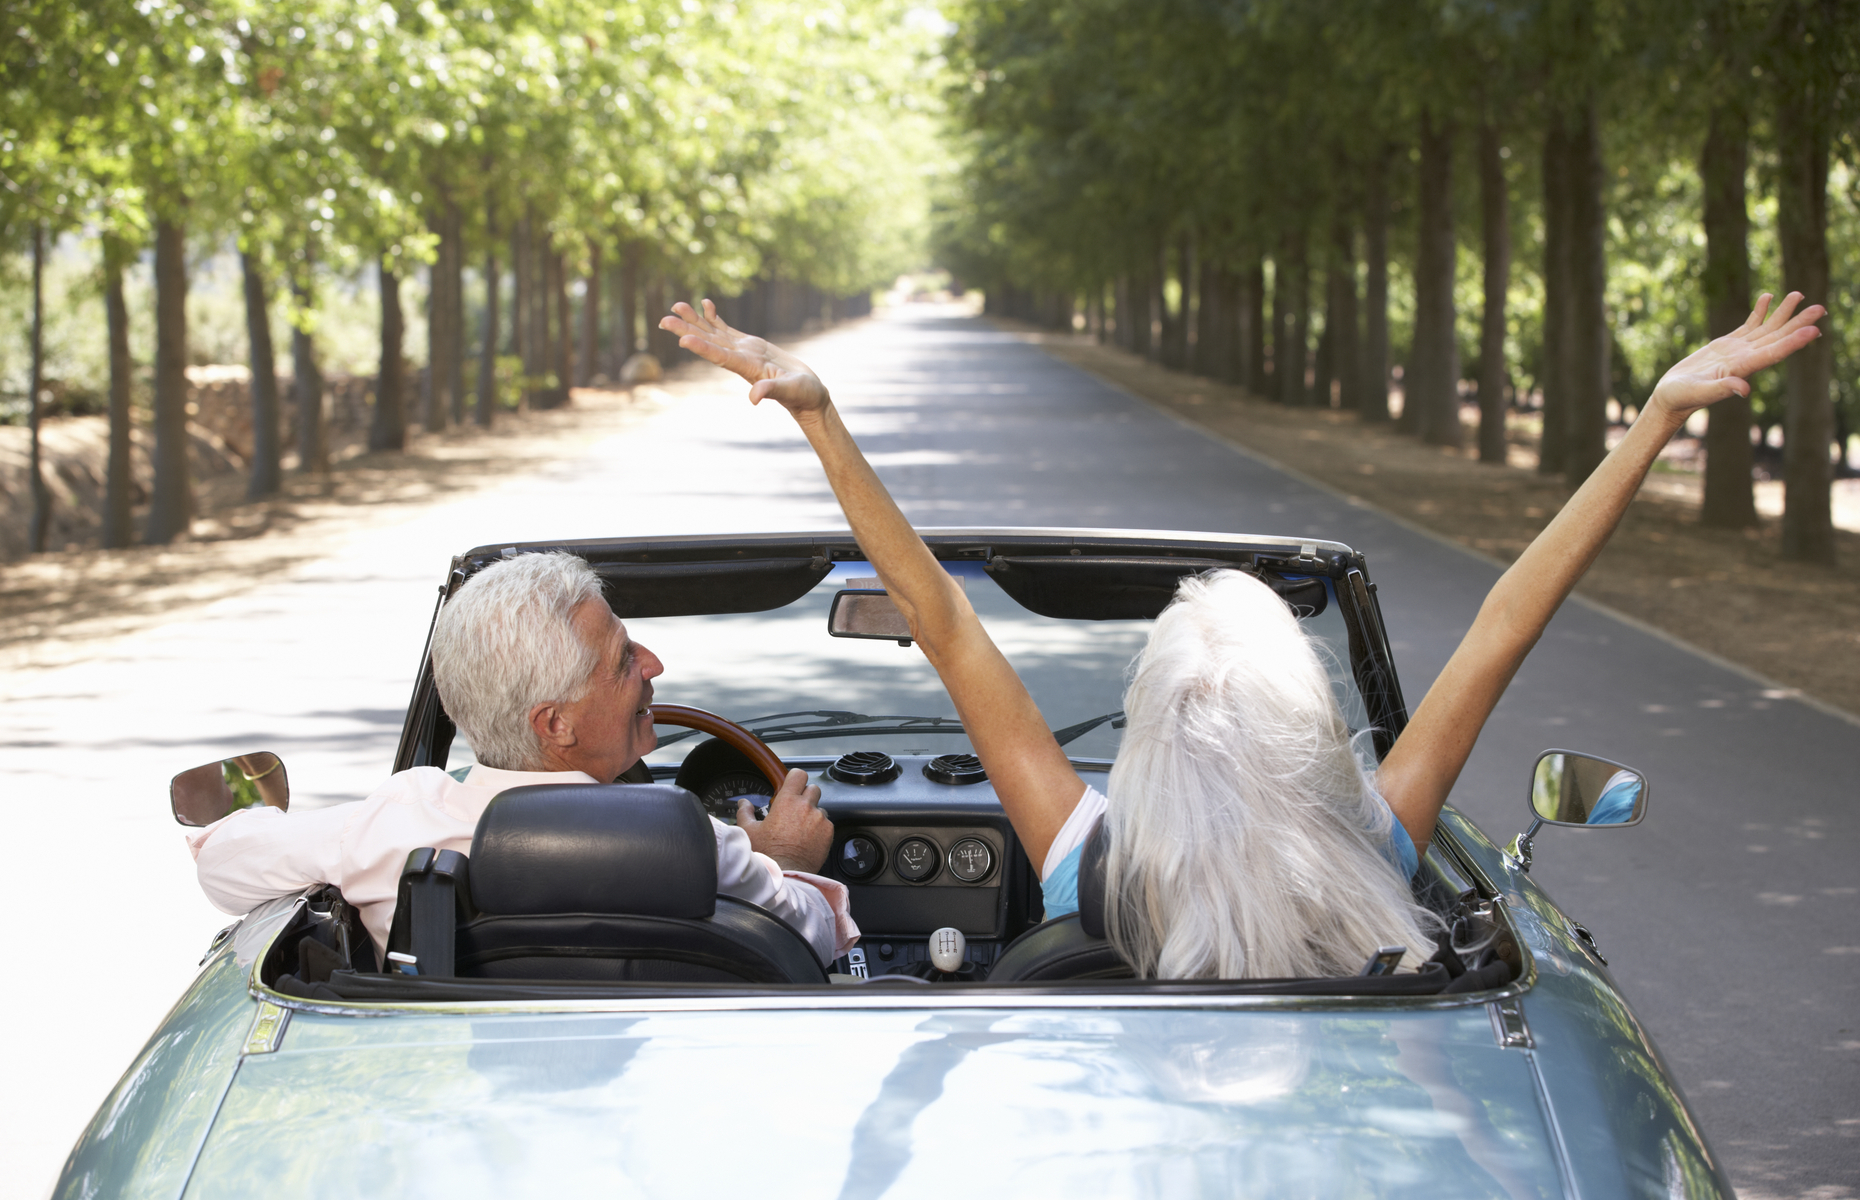 <p>Baby boomers love to get around in style. Research from NADA (National Automobile Dealers Association) shows that the group was responsible <a href="https://www.cbtnews.com/selling-to-baby-boomers-in-2019/" class="atom_link atom_valid" rel="noreferrer noopener">for 62% of all new car sales in 2019</a>, with the average age of a new car buyer being 51.7 years old. When going to buy a big-ticket item like an automobile, baby boomers expect to be schmoozed and to receive personalized service.</p>